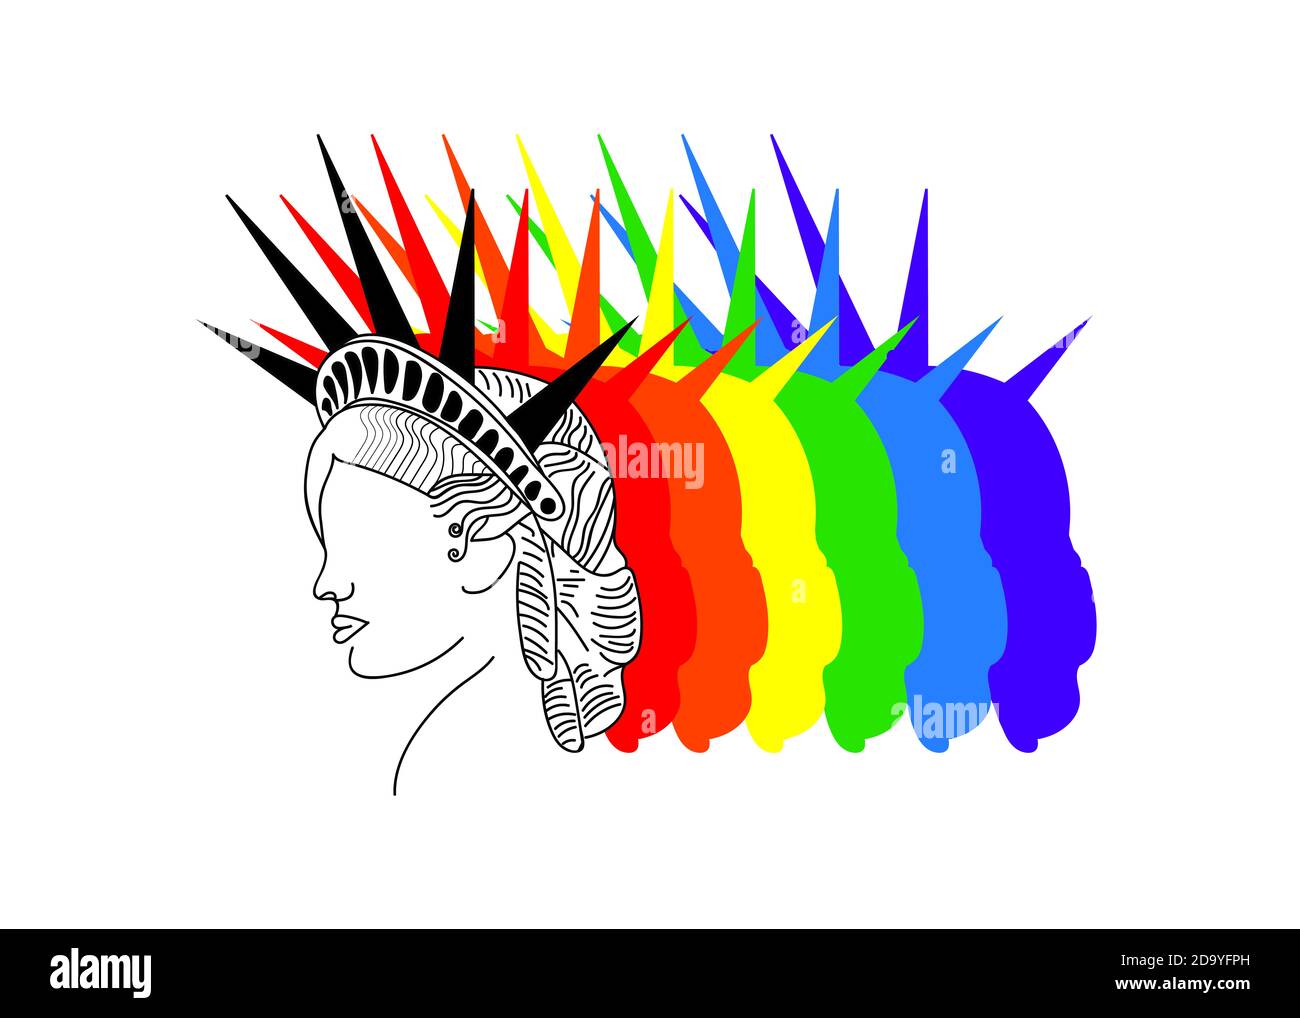 Statue of Liberty logo, illustration, LGBT normal colors Stock Photo